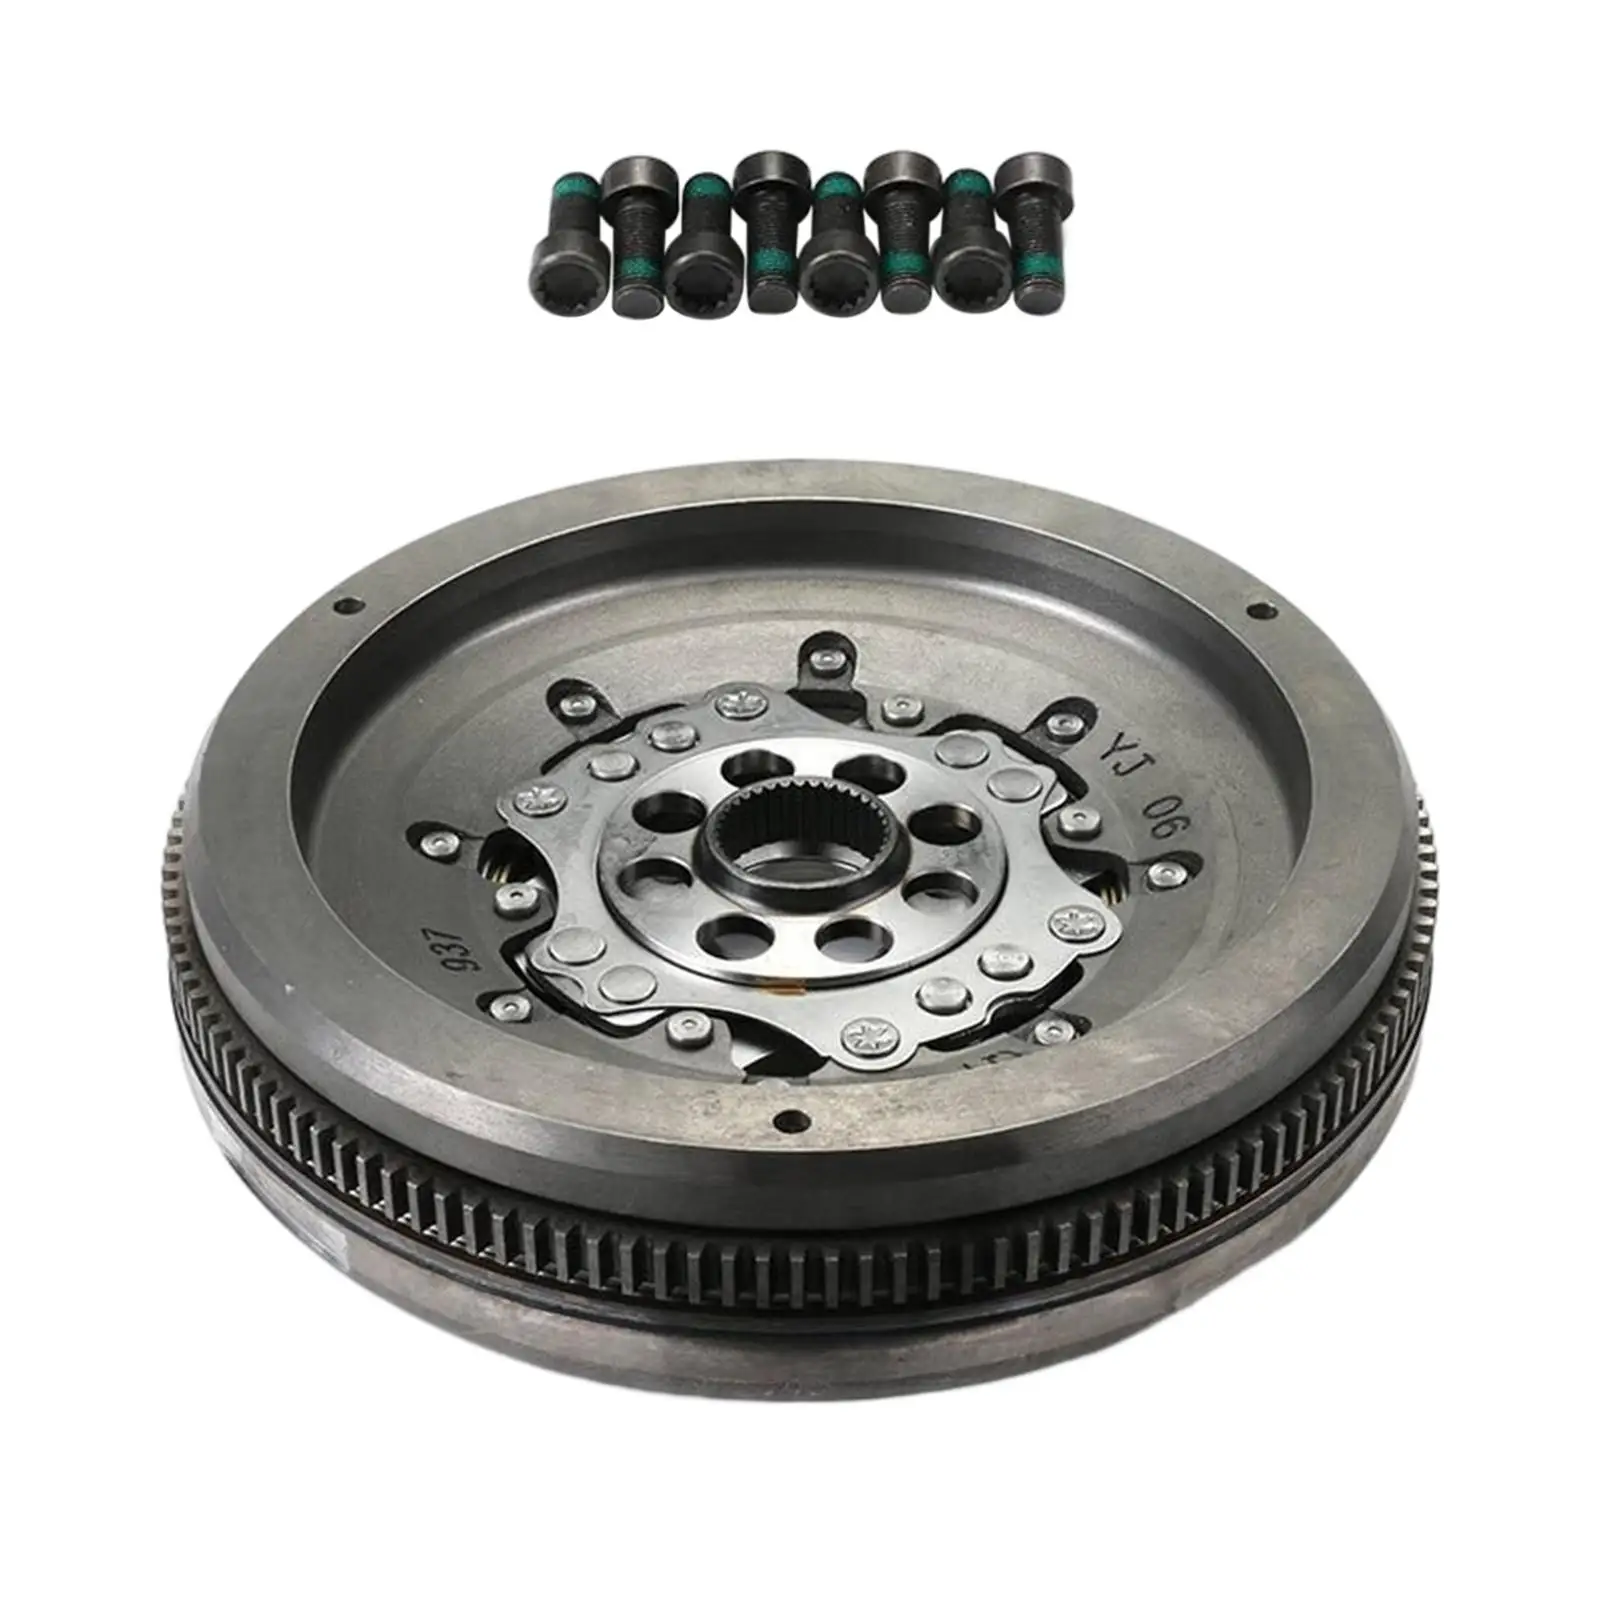 Transmission Flywheel 02E Dq250 132 Teeth 8 Holes for VW Accessories Durable